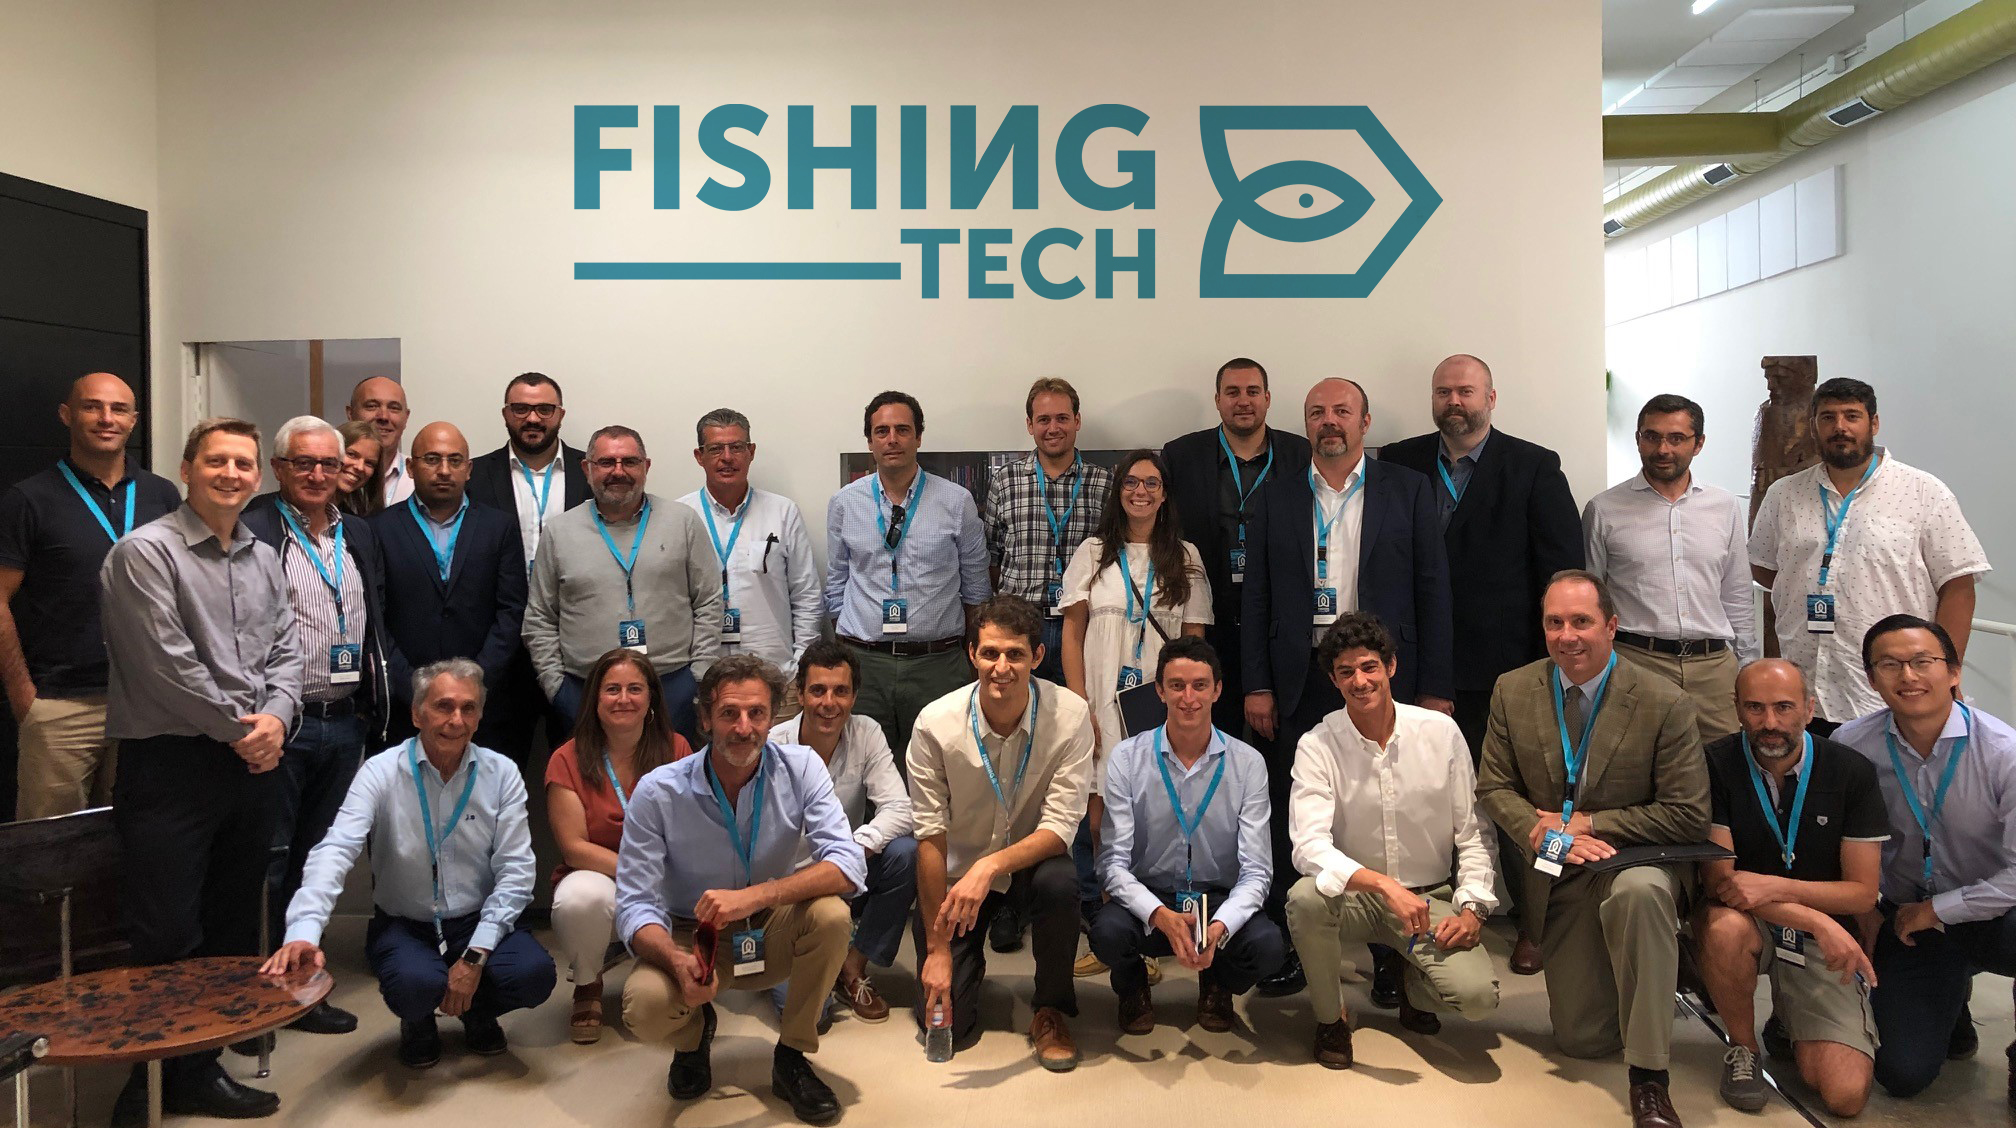 8 STARTUPS FROM 8 DIFFERENT COUNTRIES IN THE OPENING DAY OF THE